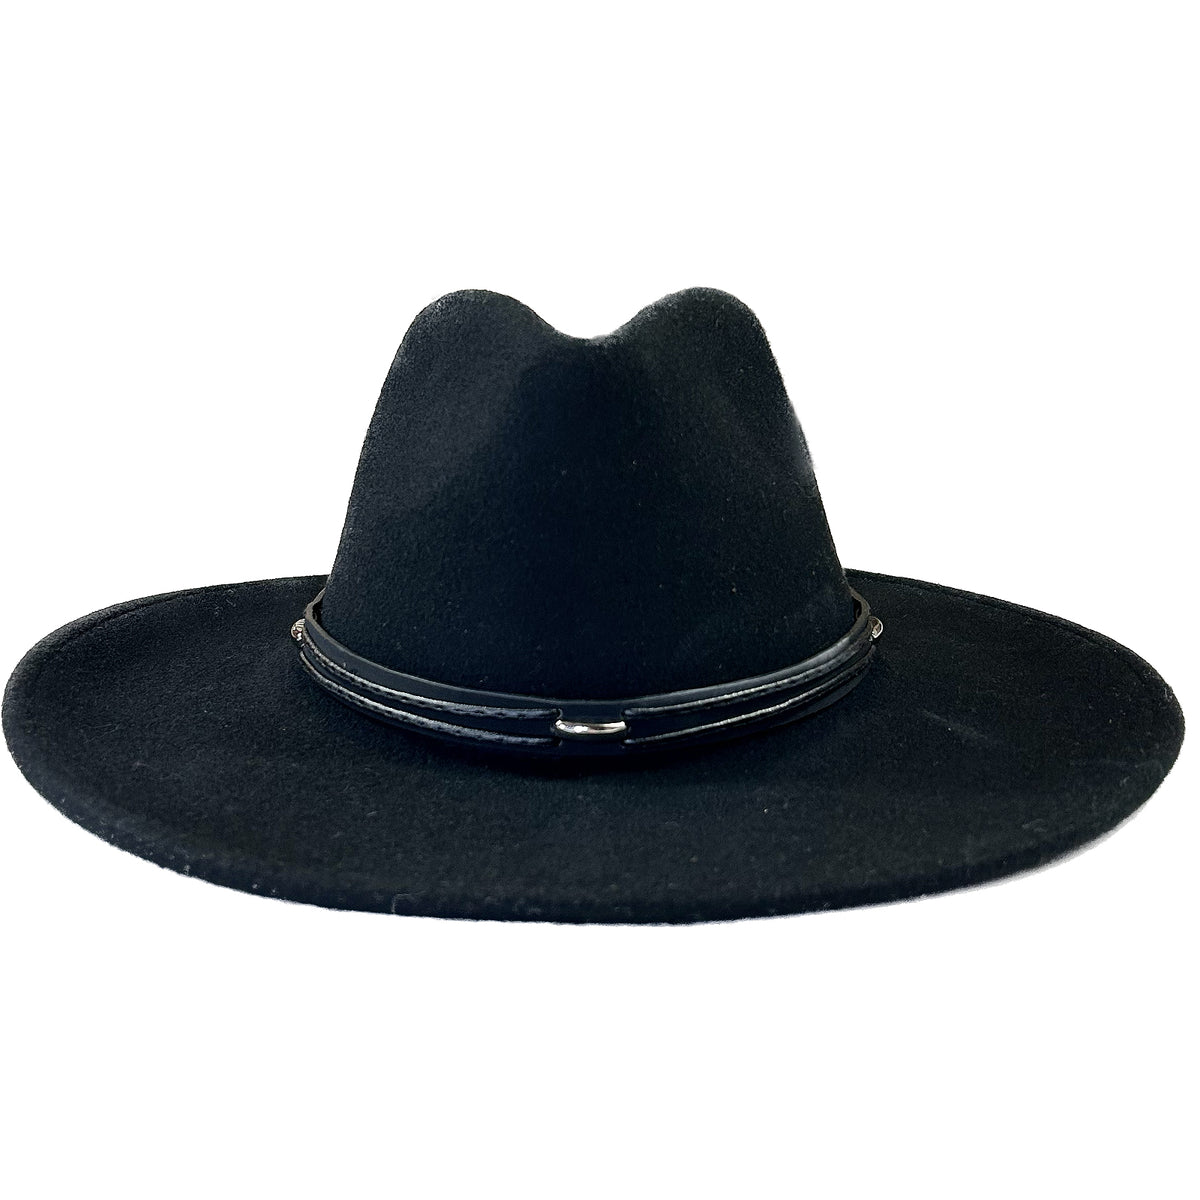 Black Wool Felt Outback Western Cowboy Hat with leatherette Leather Band